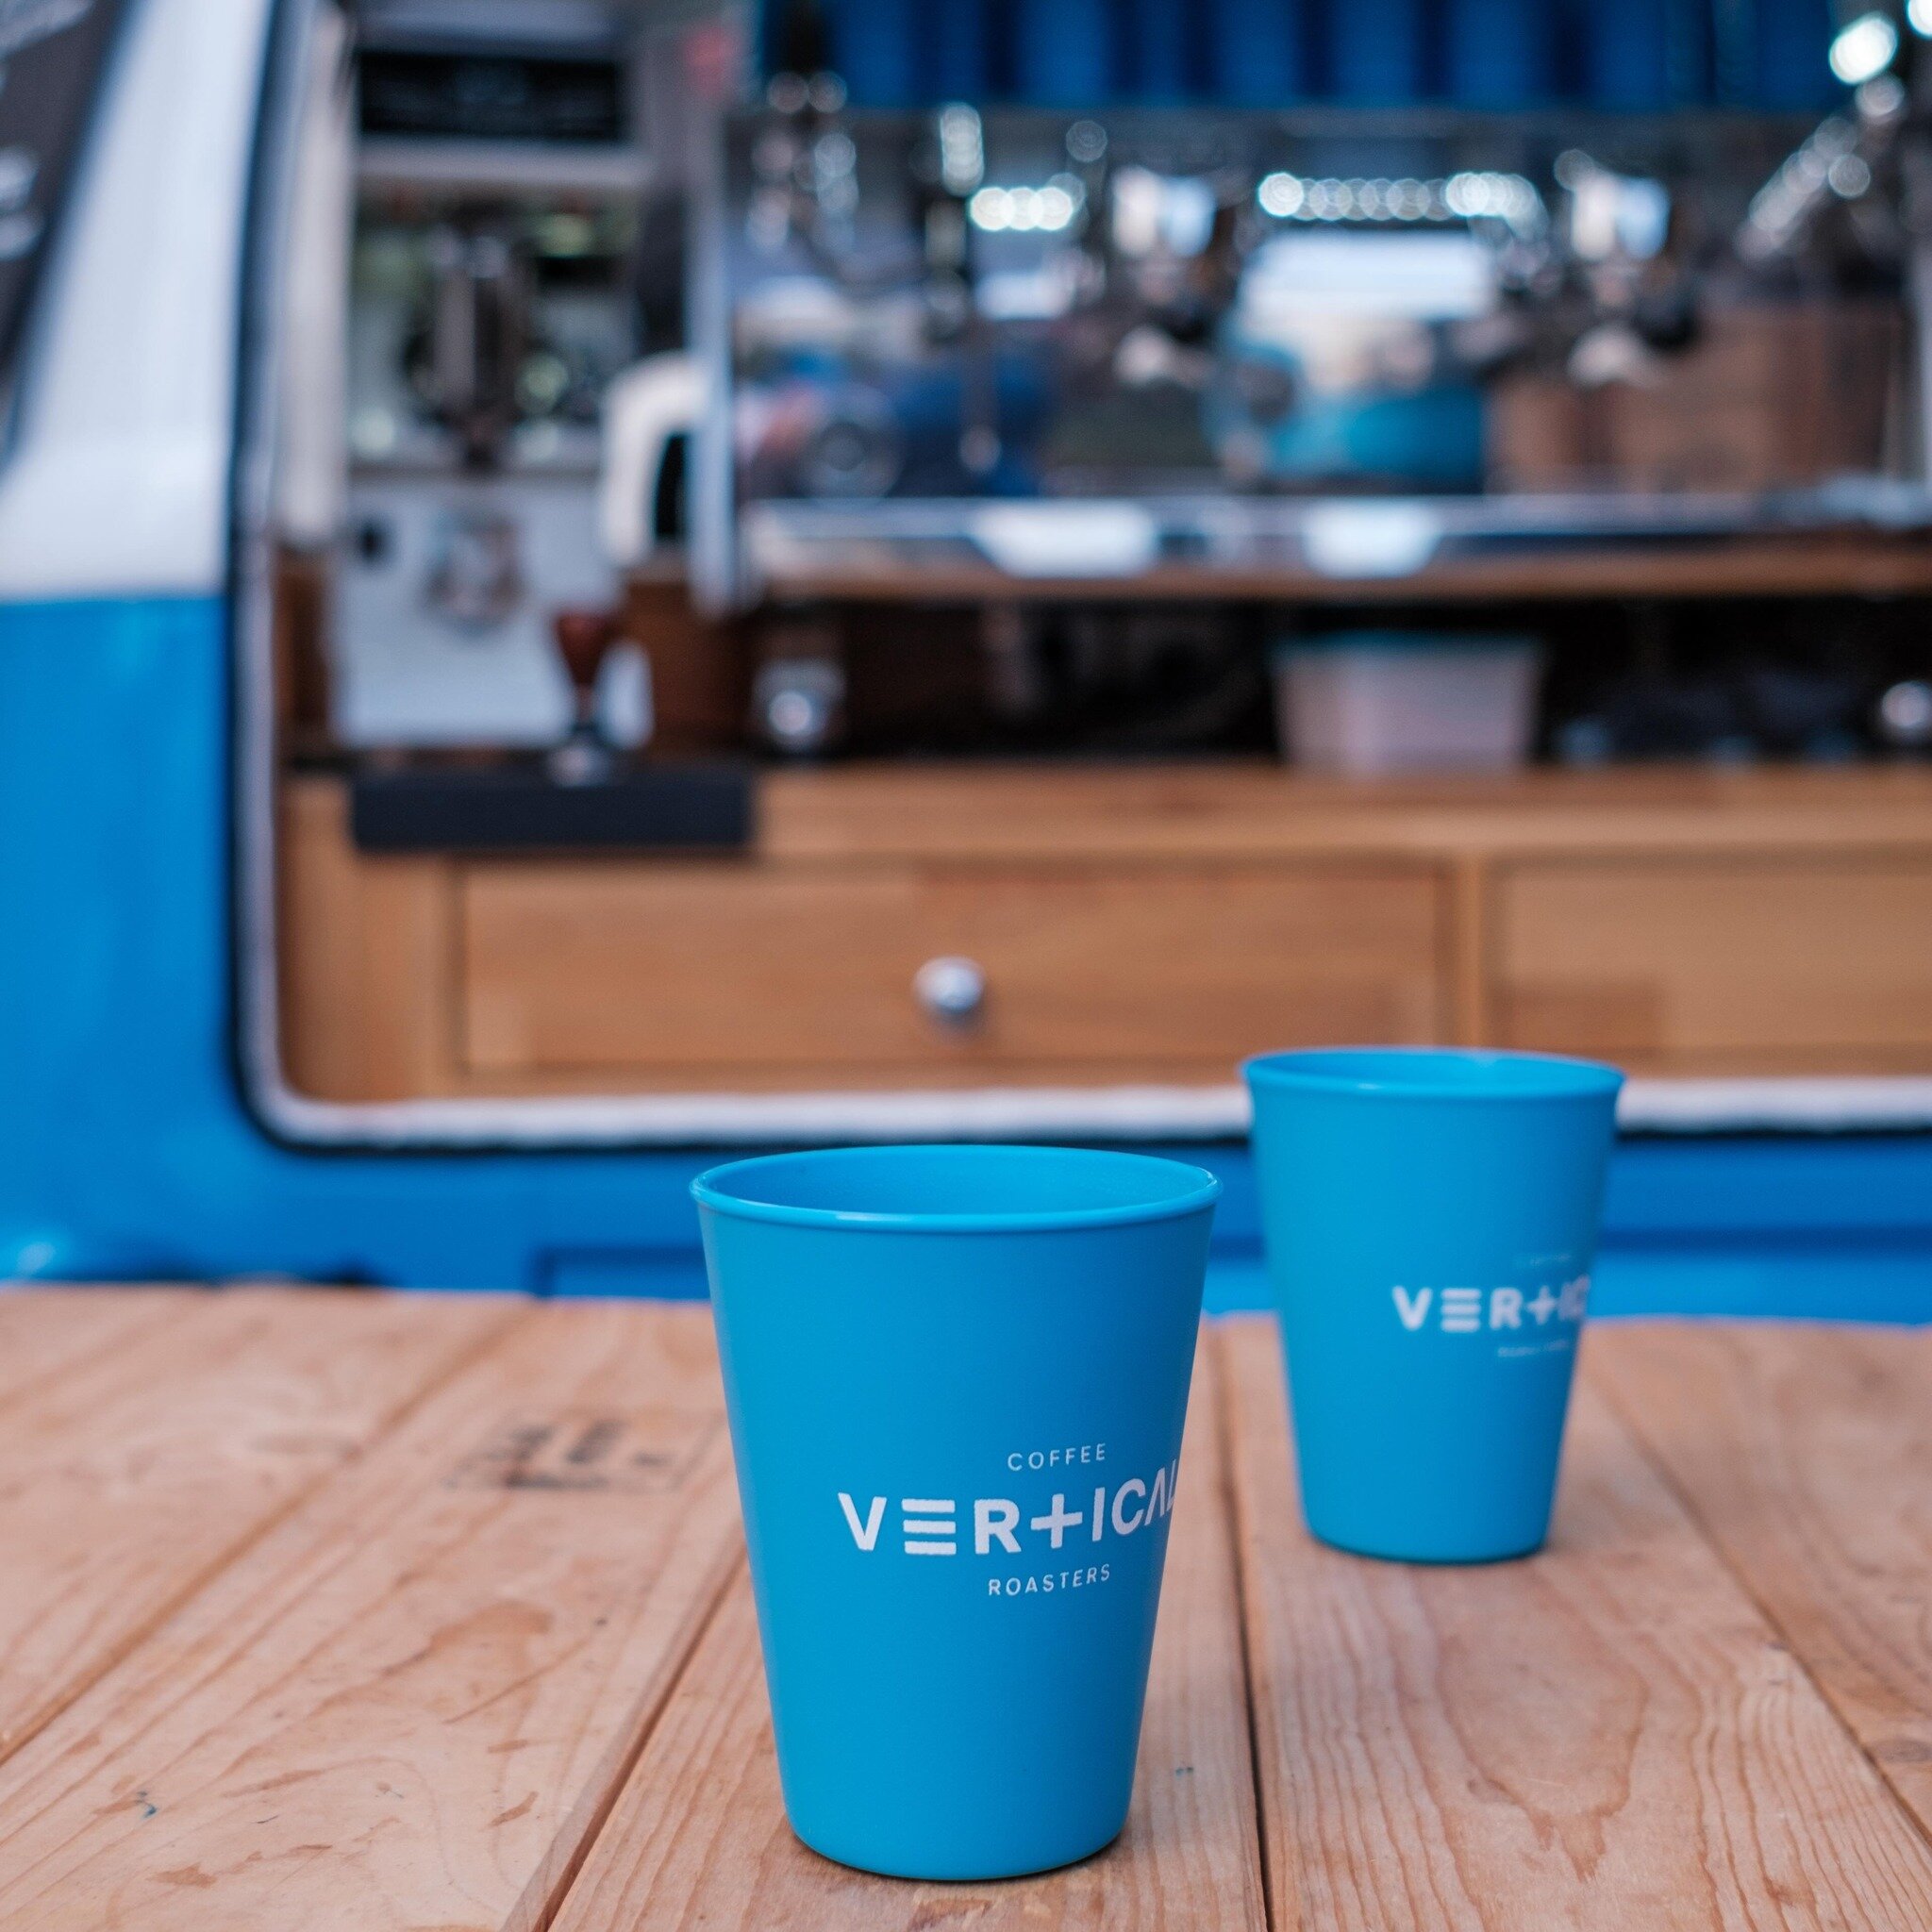 Reusable cups for events whenever and wherever feasible 💙
. 
.
.
#reusablecups
#coffeecatering
#reuse
#cateringequipment
#coffeecups
#moderncoffee
#tastycoffee
#specialtycoffee
#itstasty
#specialtycoffee
#coffeewithaltitude